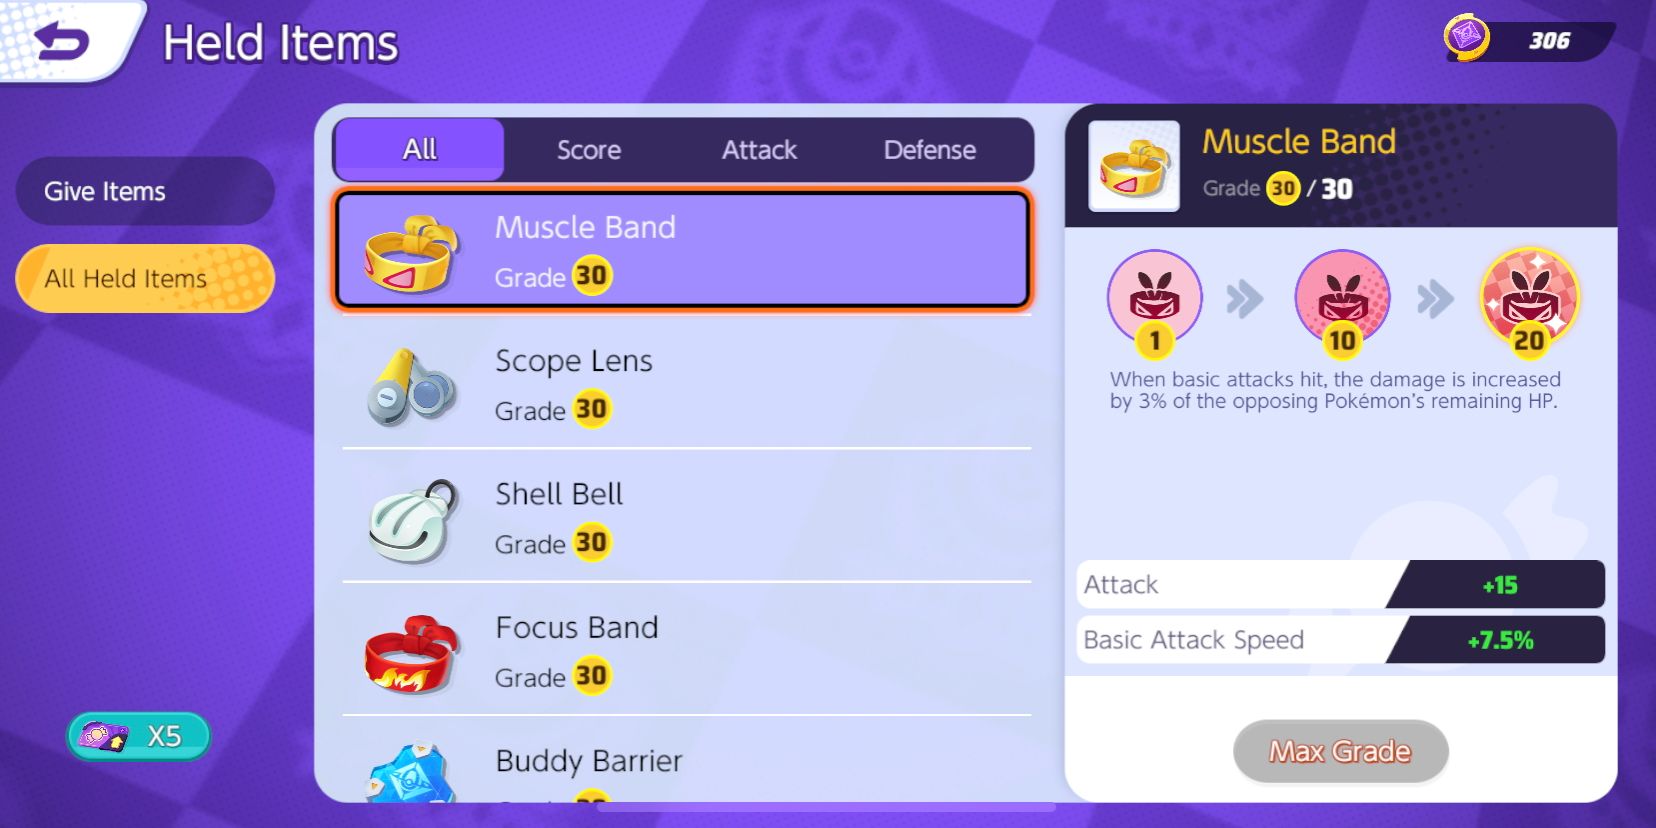 Held Item selection screen from Pokemon Unite, with Muscle Band selected